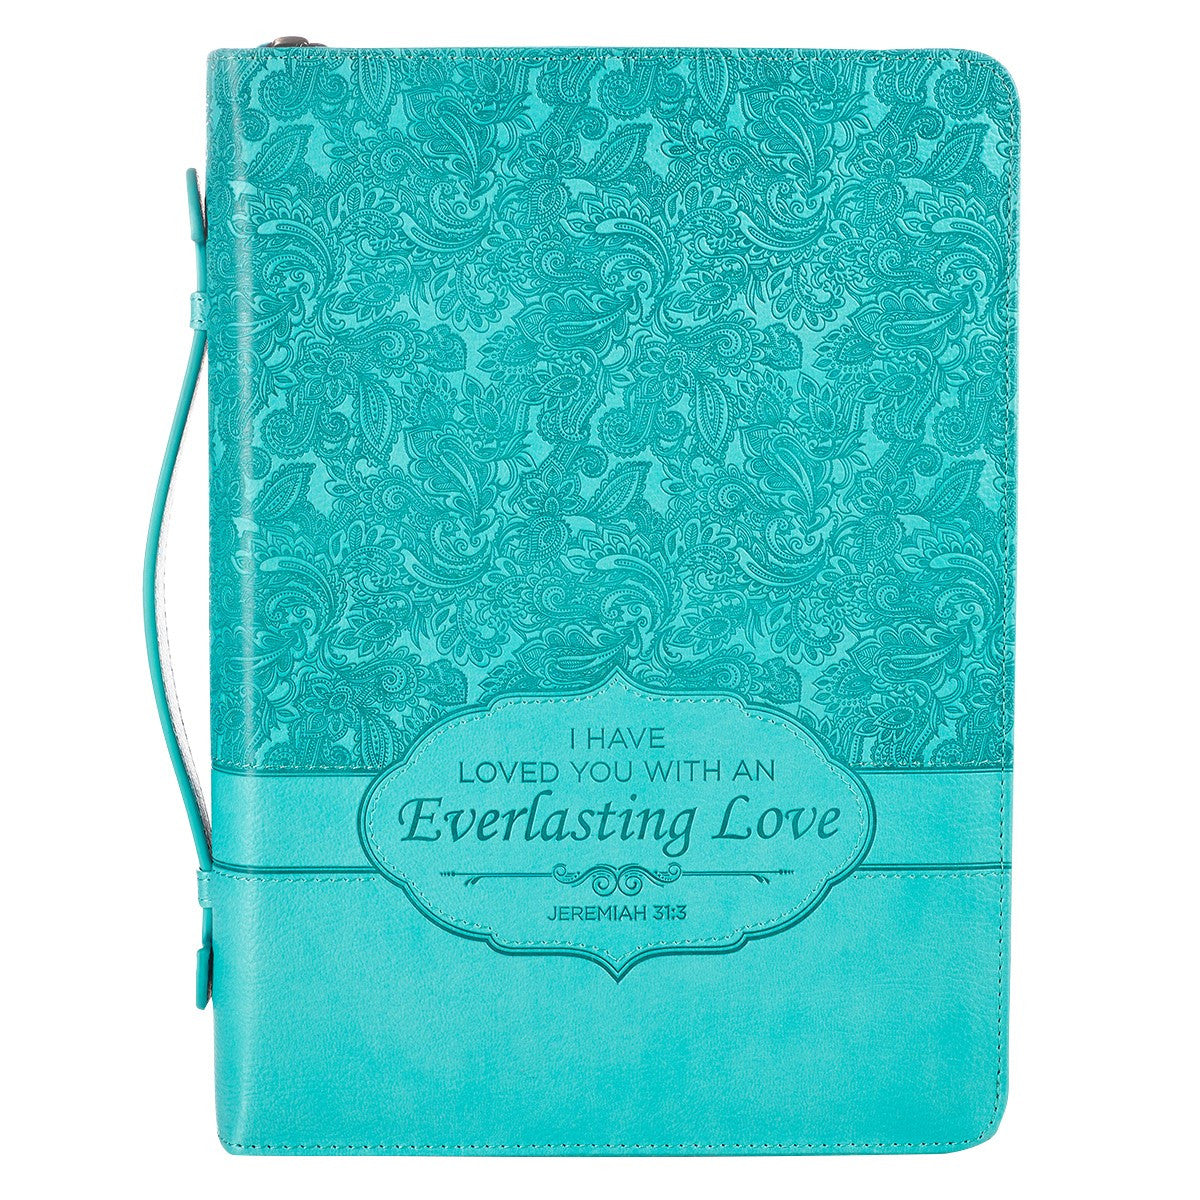 Everlasting Love Turquoise Faux Leather Fashion Bible Cover - Jeremiah 31:3